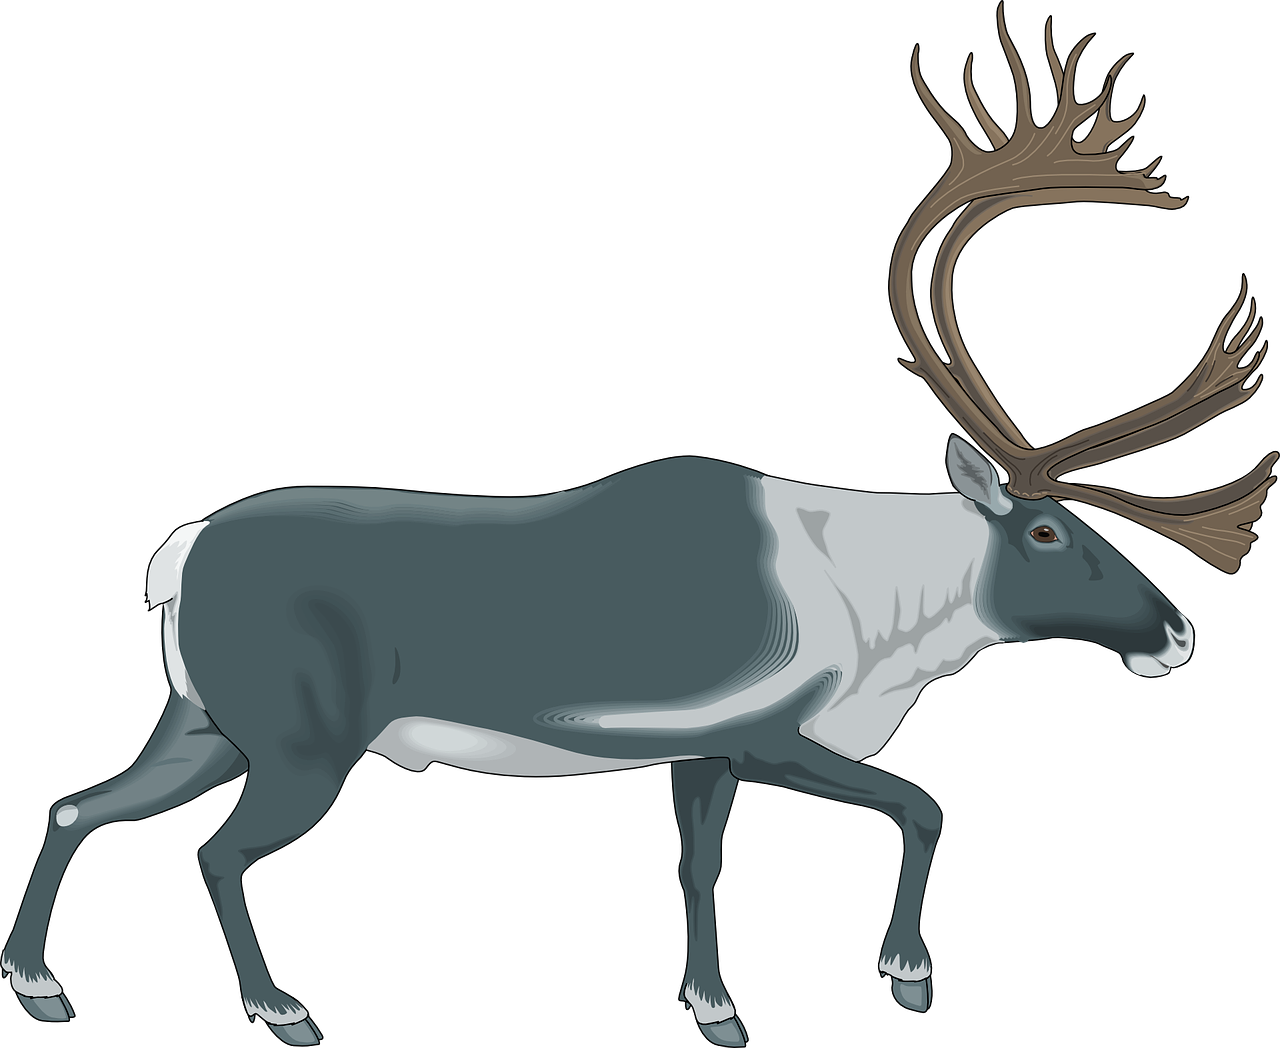 a reindeer with antlers standing in front of a black background, an illustration of, side view of a gaunt, wikihow illustration, large creatures in distance, alaska